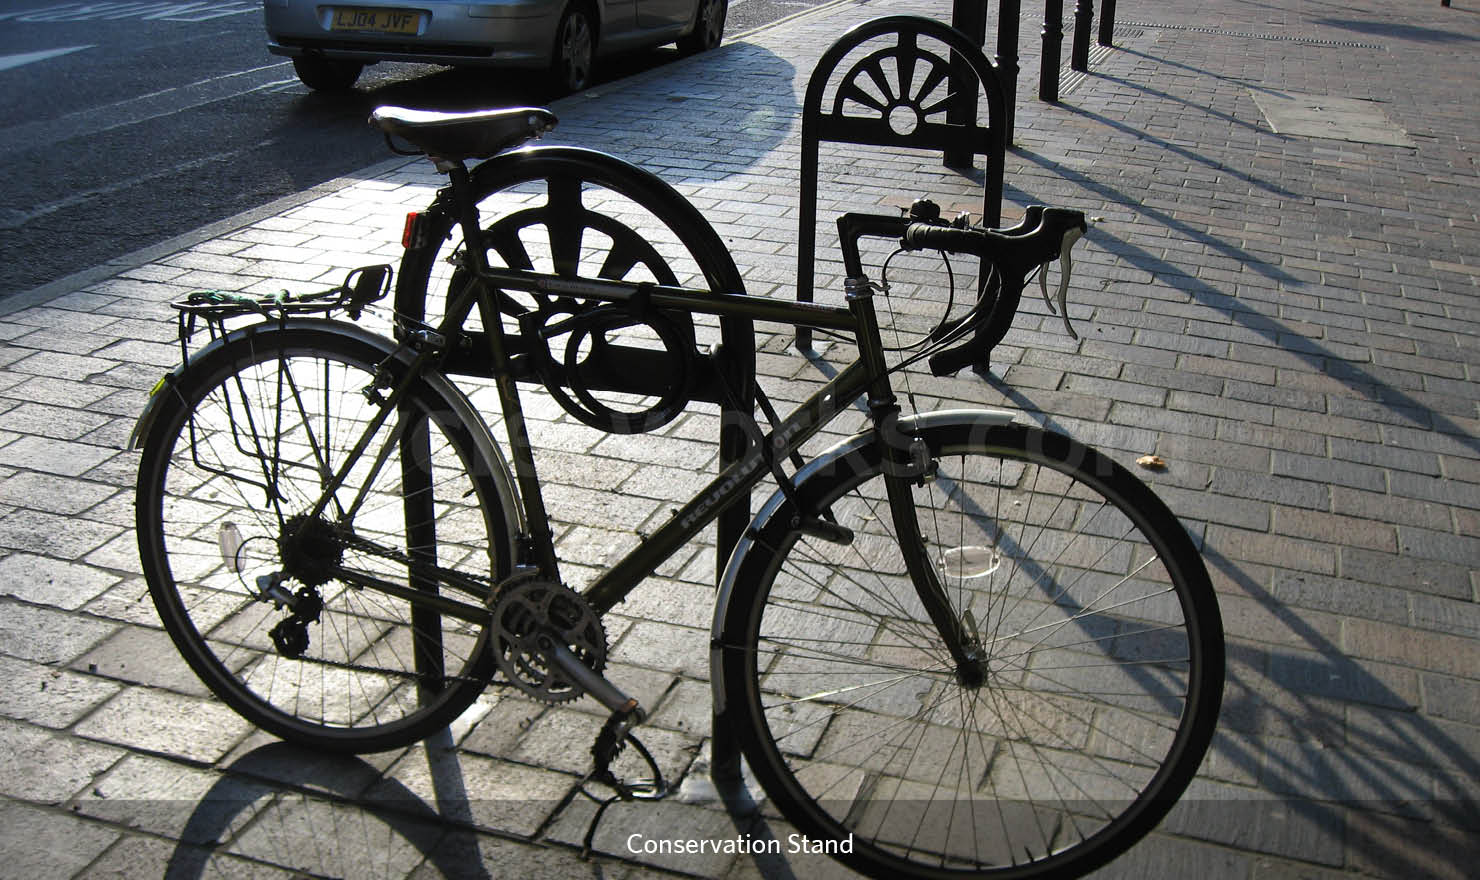 Conservation Cycle Rack